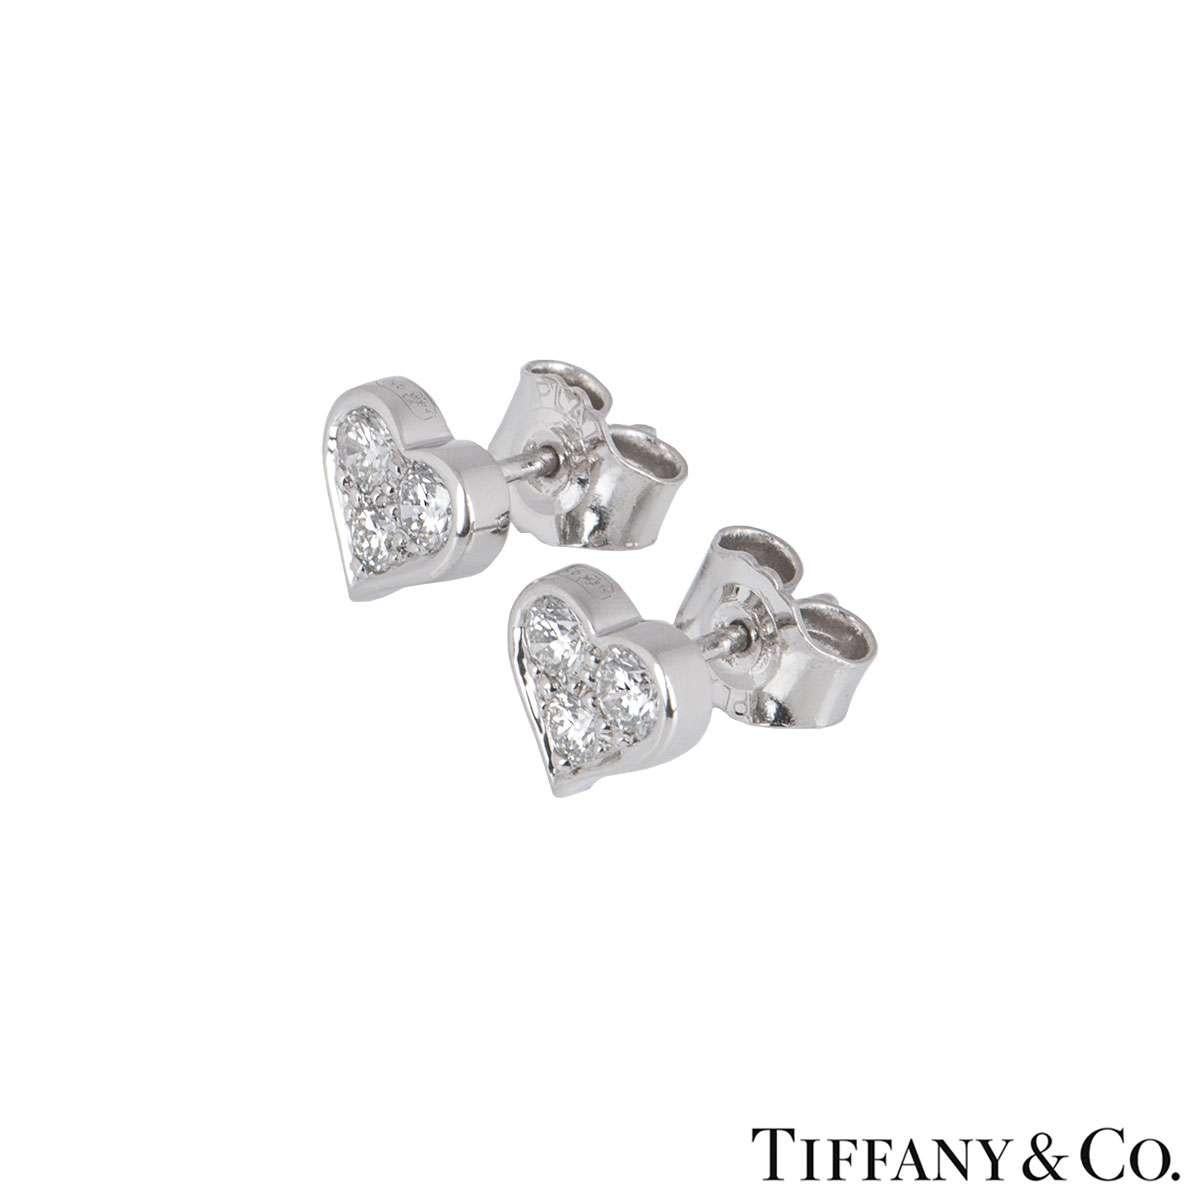 A pair of diamond earrings in platinum from the Hearts collection by Tiffany & Co. Each earring is set with three round brilliant cut diamonds totalling 0.37ct. The earrings have butterfly backs and have a gross weight of 2.92 grams.

The earrings